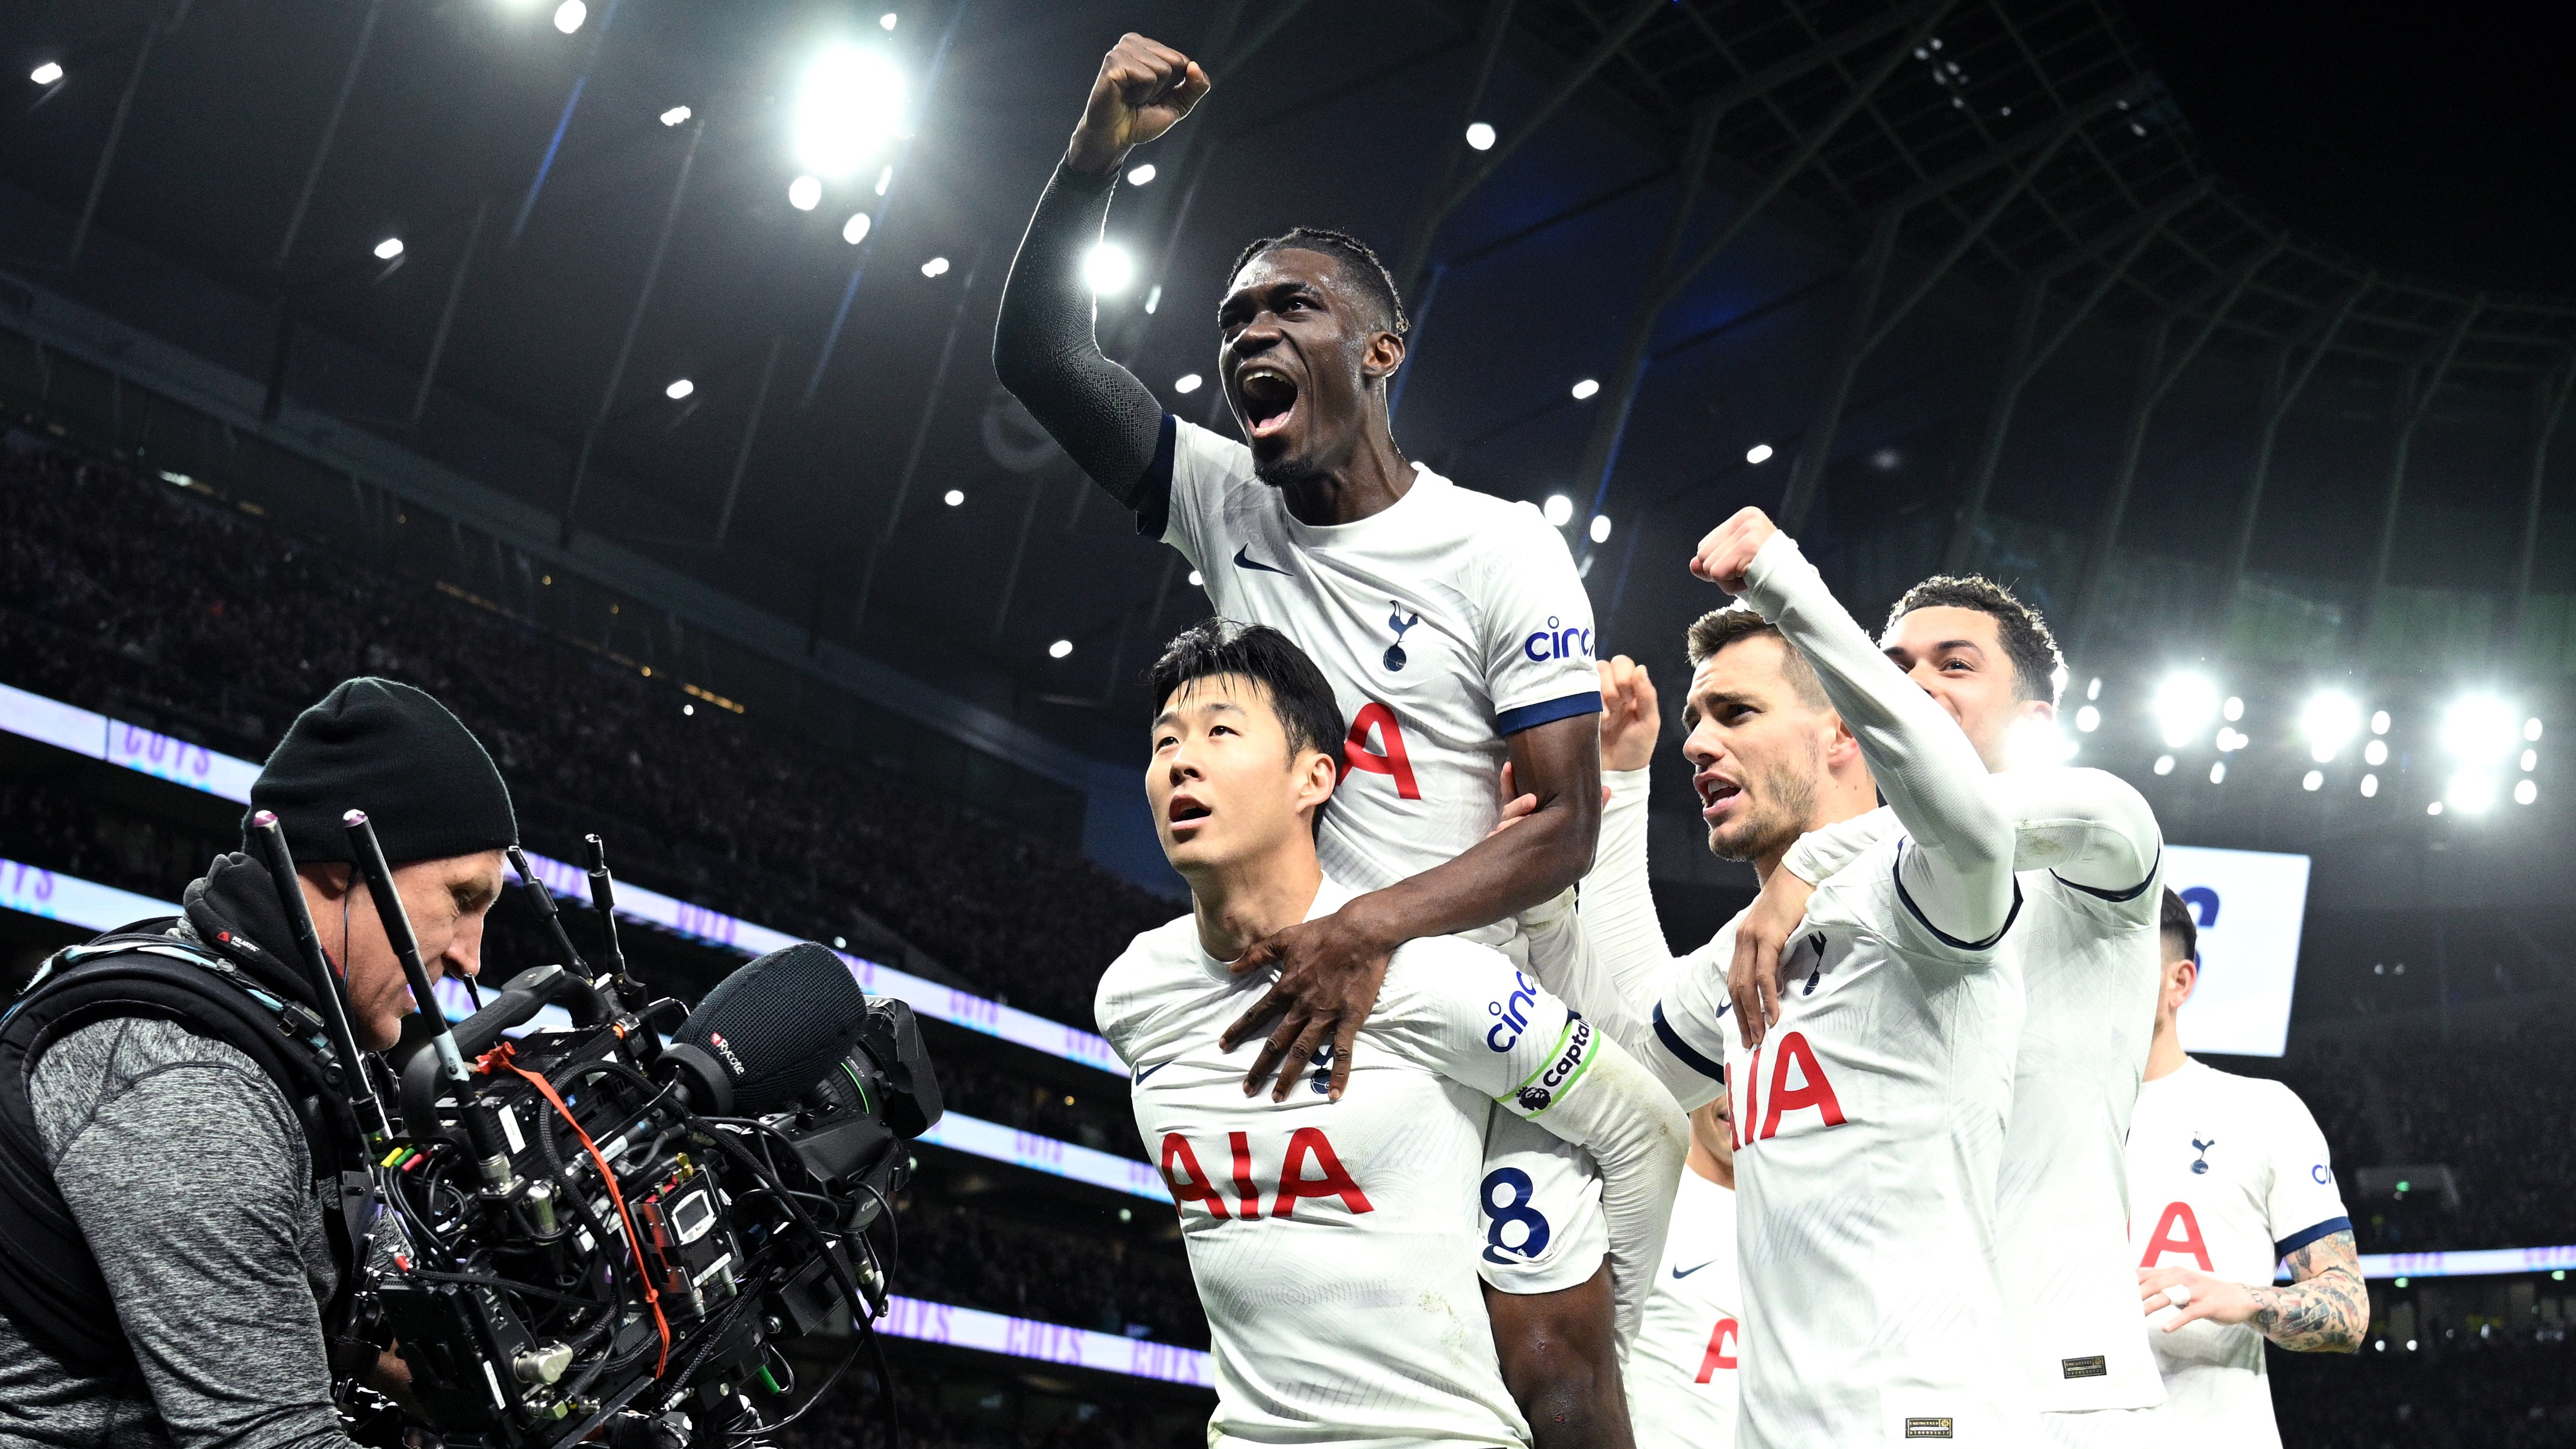 Tottenham are playing a similarly adventurous, aggressive style of football to Arsenal or City but without the mechanisms of control and protection